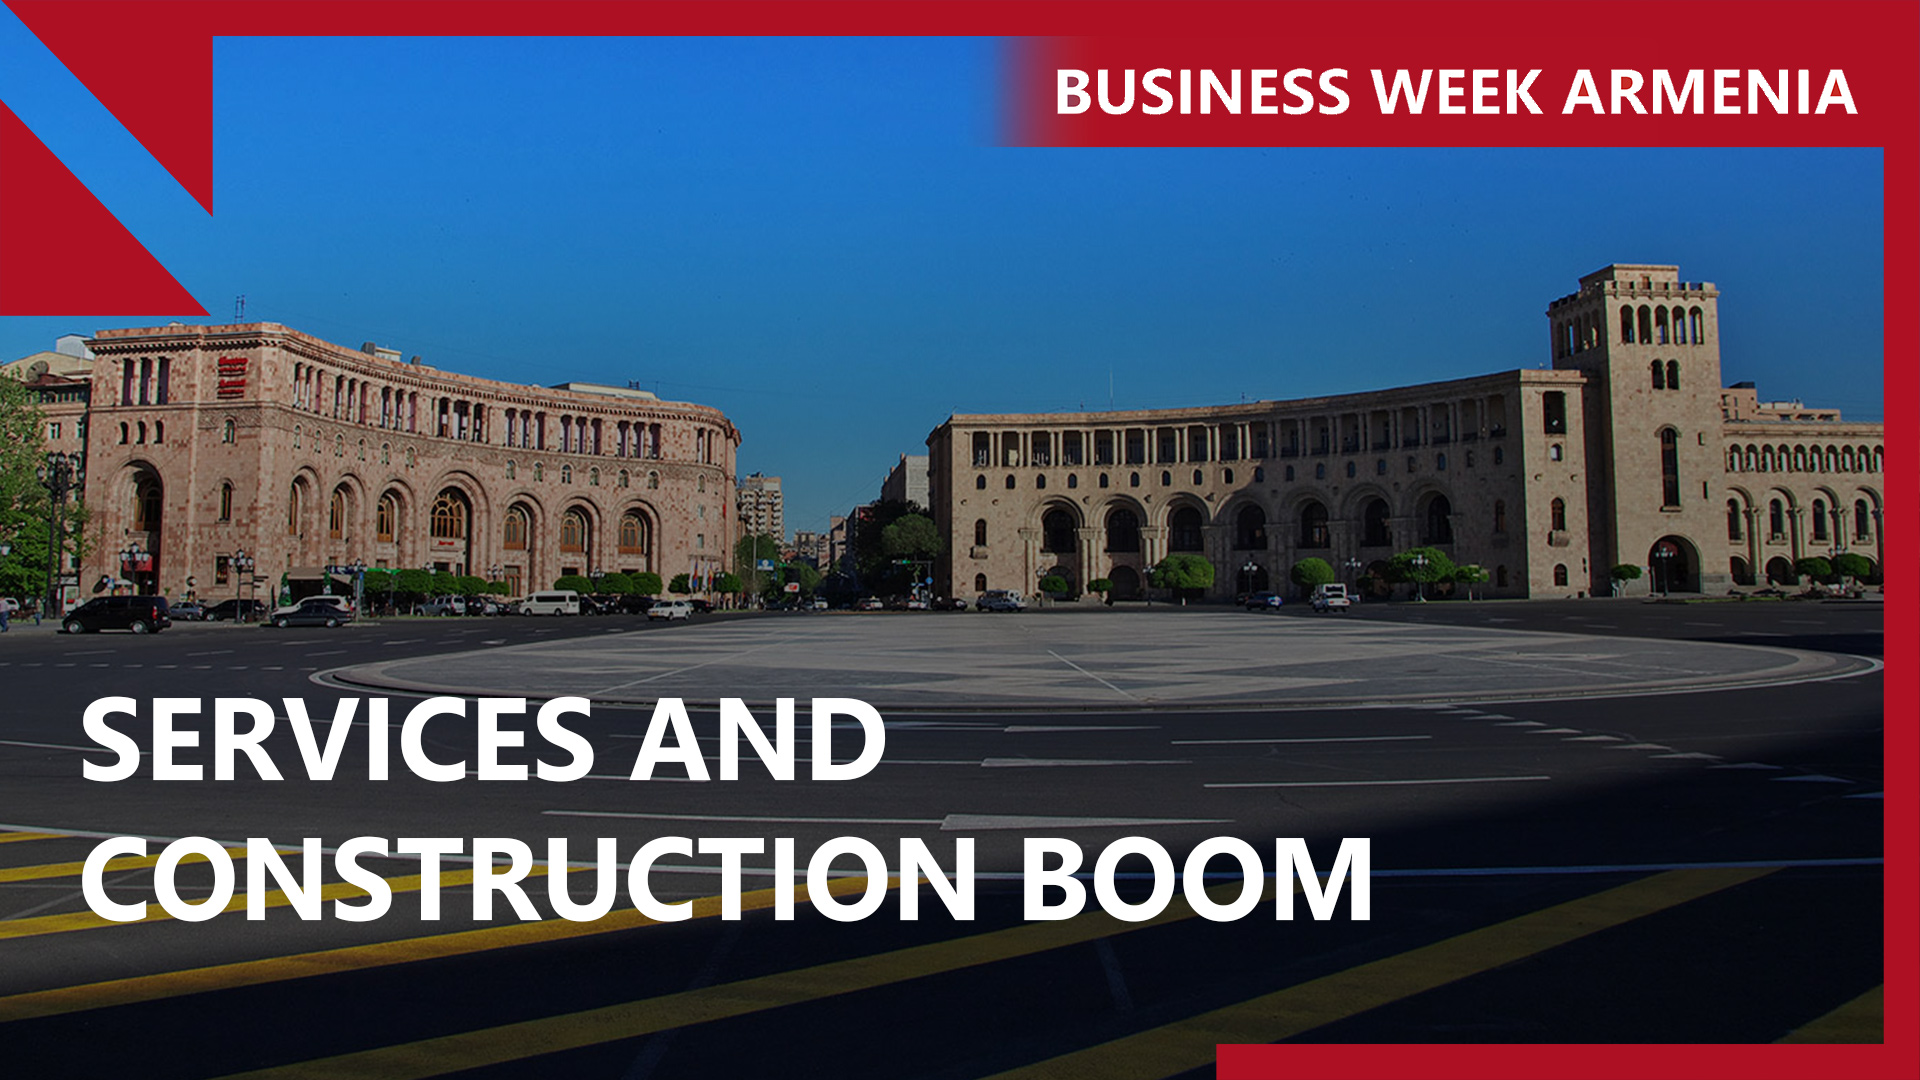 Armenia raises growth projections above 7%: THIS WEEK IN BUSINESS